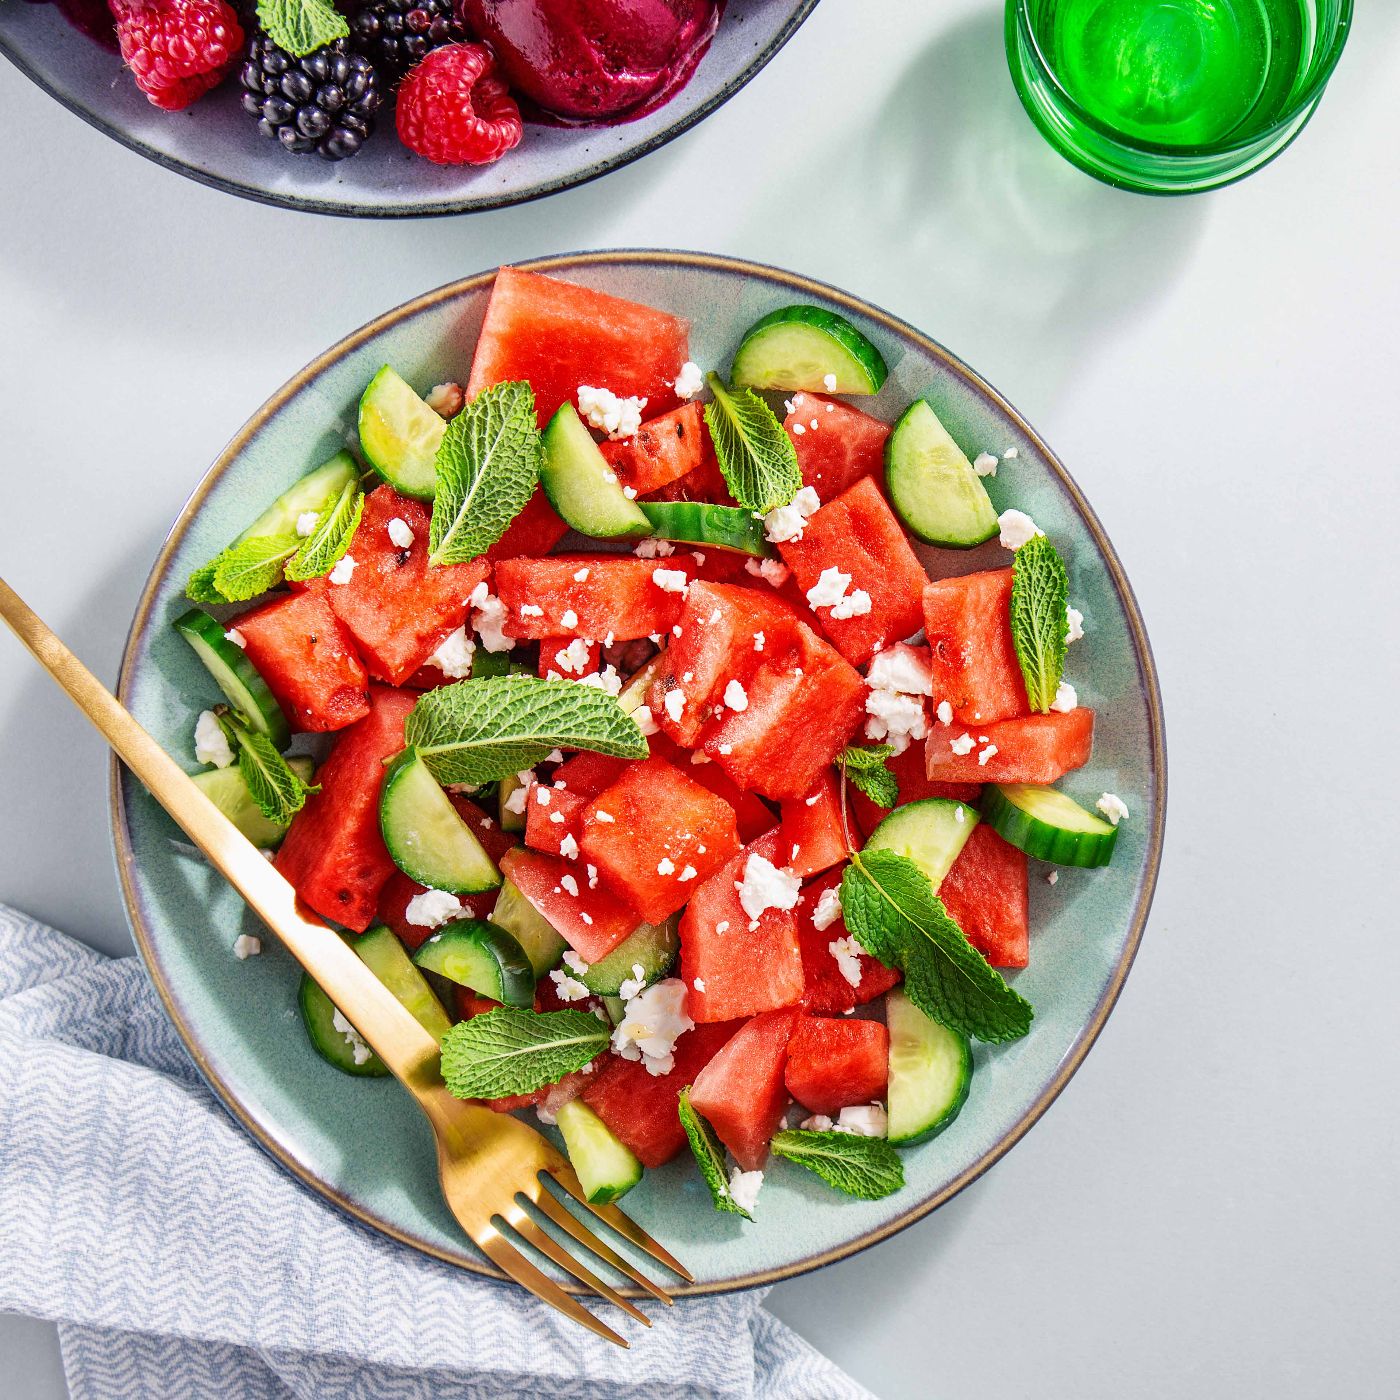 Summer-salads-with-watermelon-and-cucumbers,-berries-and-ice-cream-1158288528_5755x3837-square.jpg